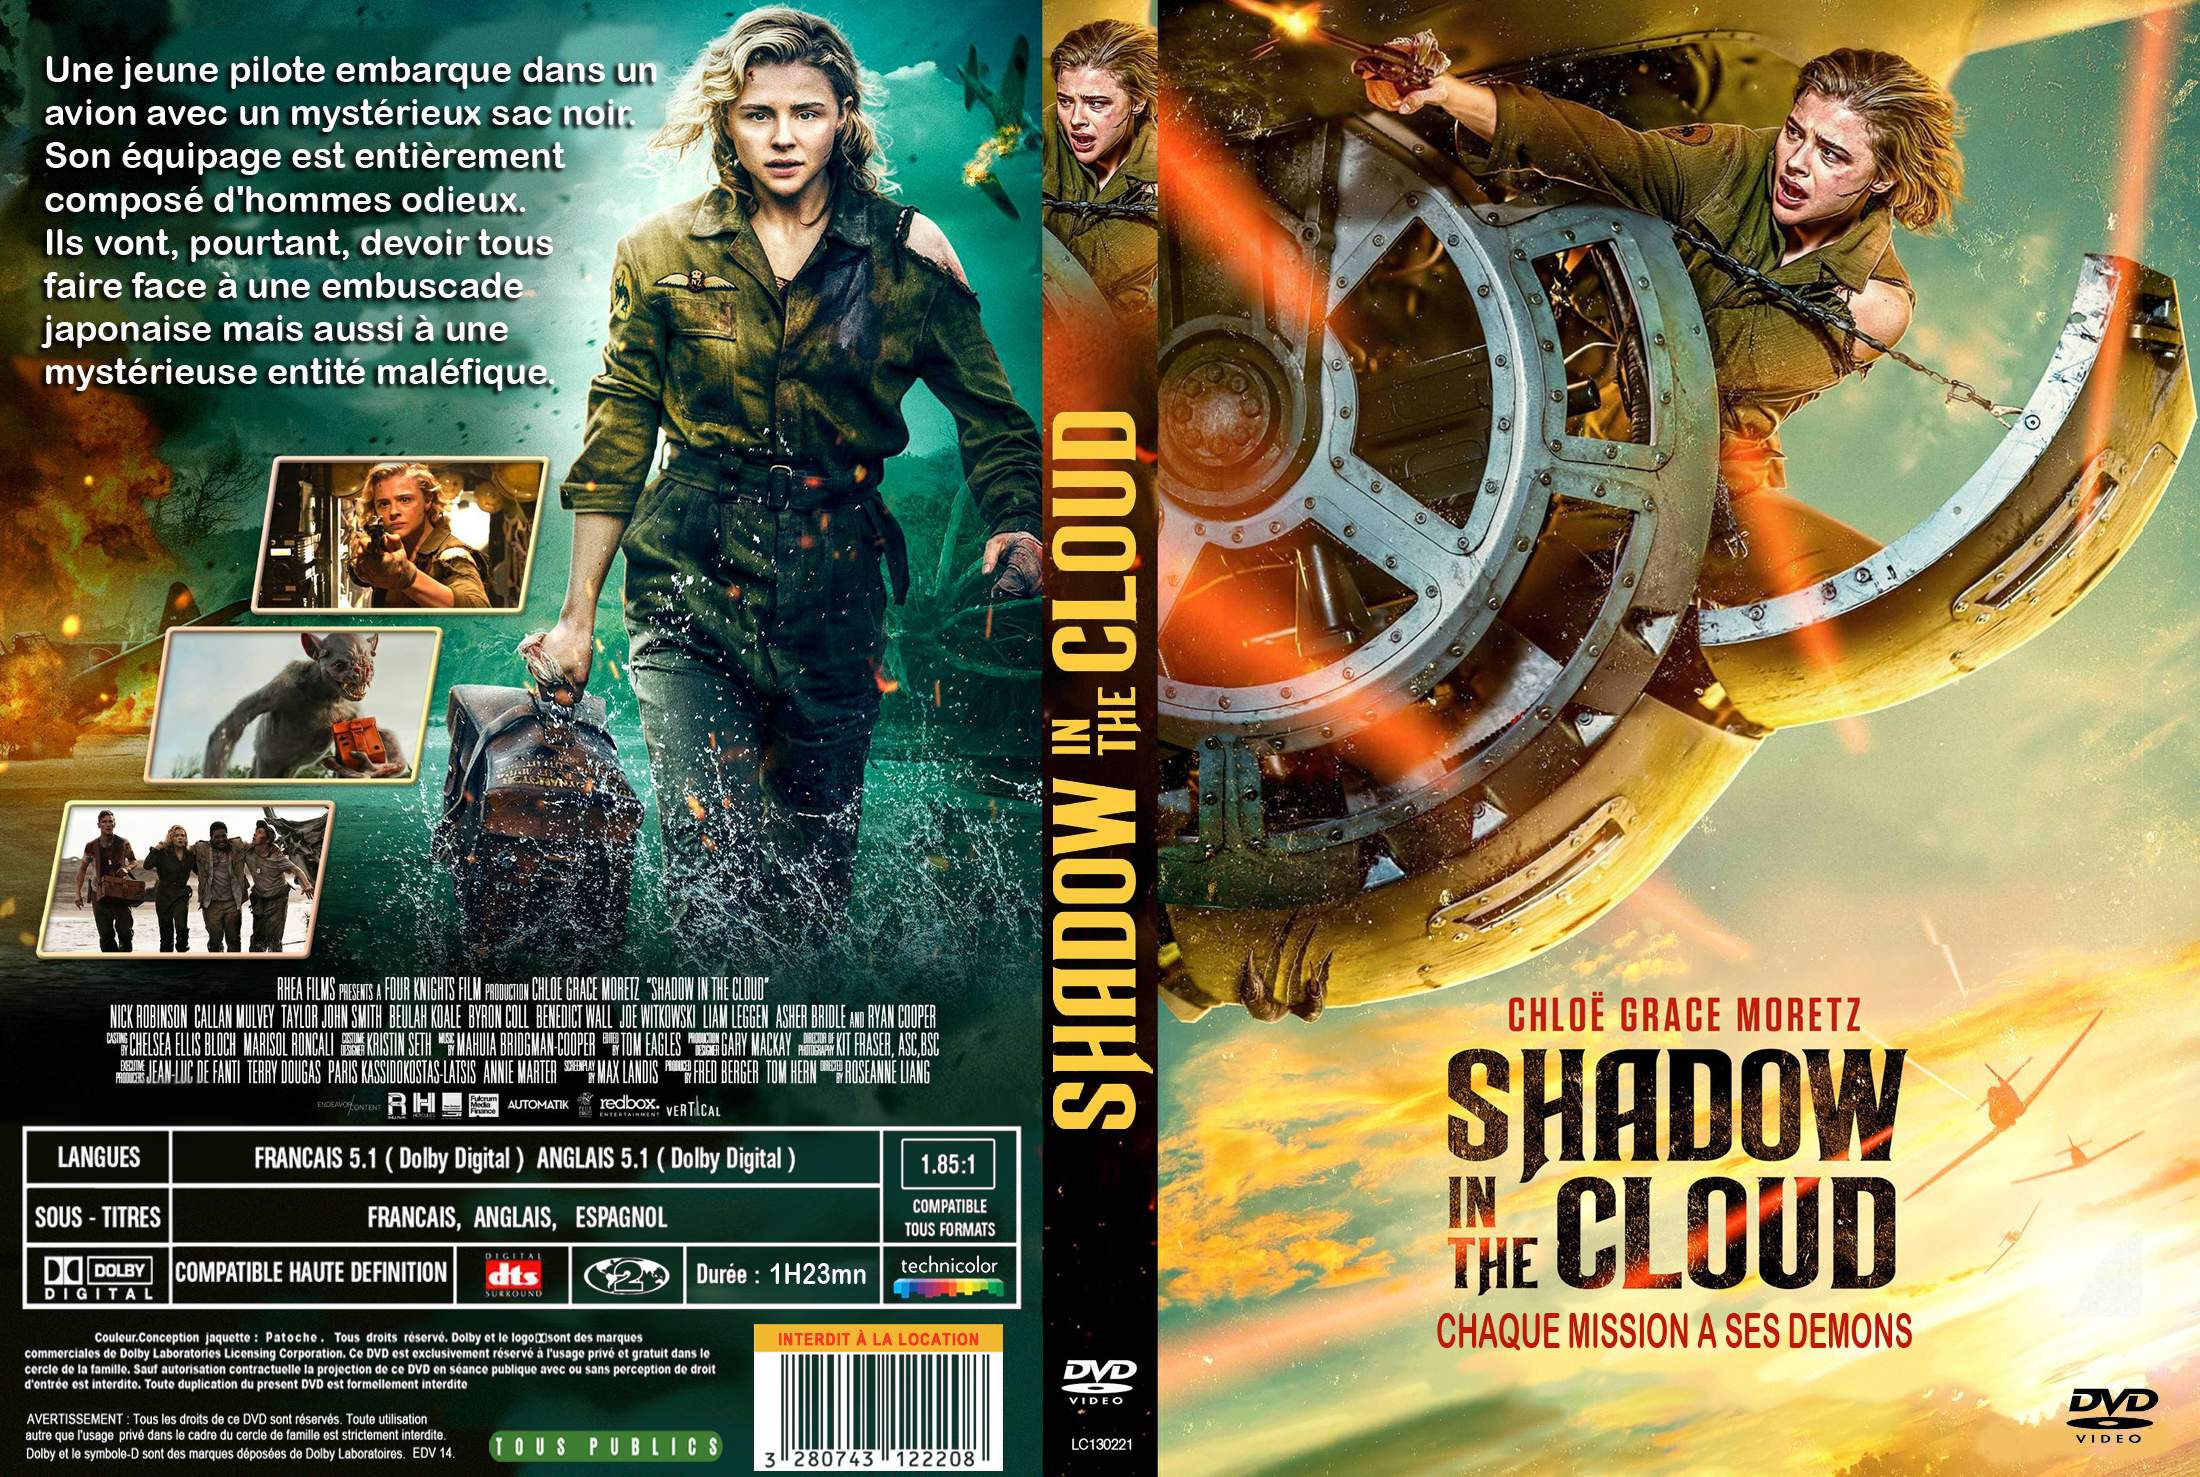 Jaquette DVD Shadow in the Cloud custom